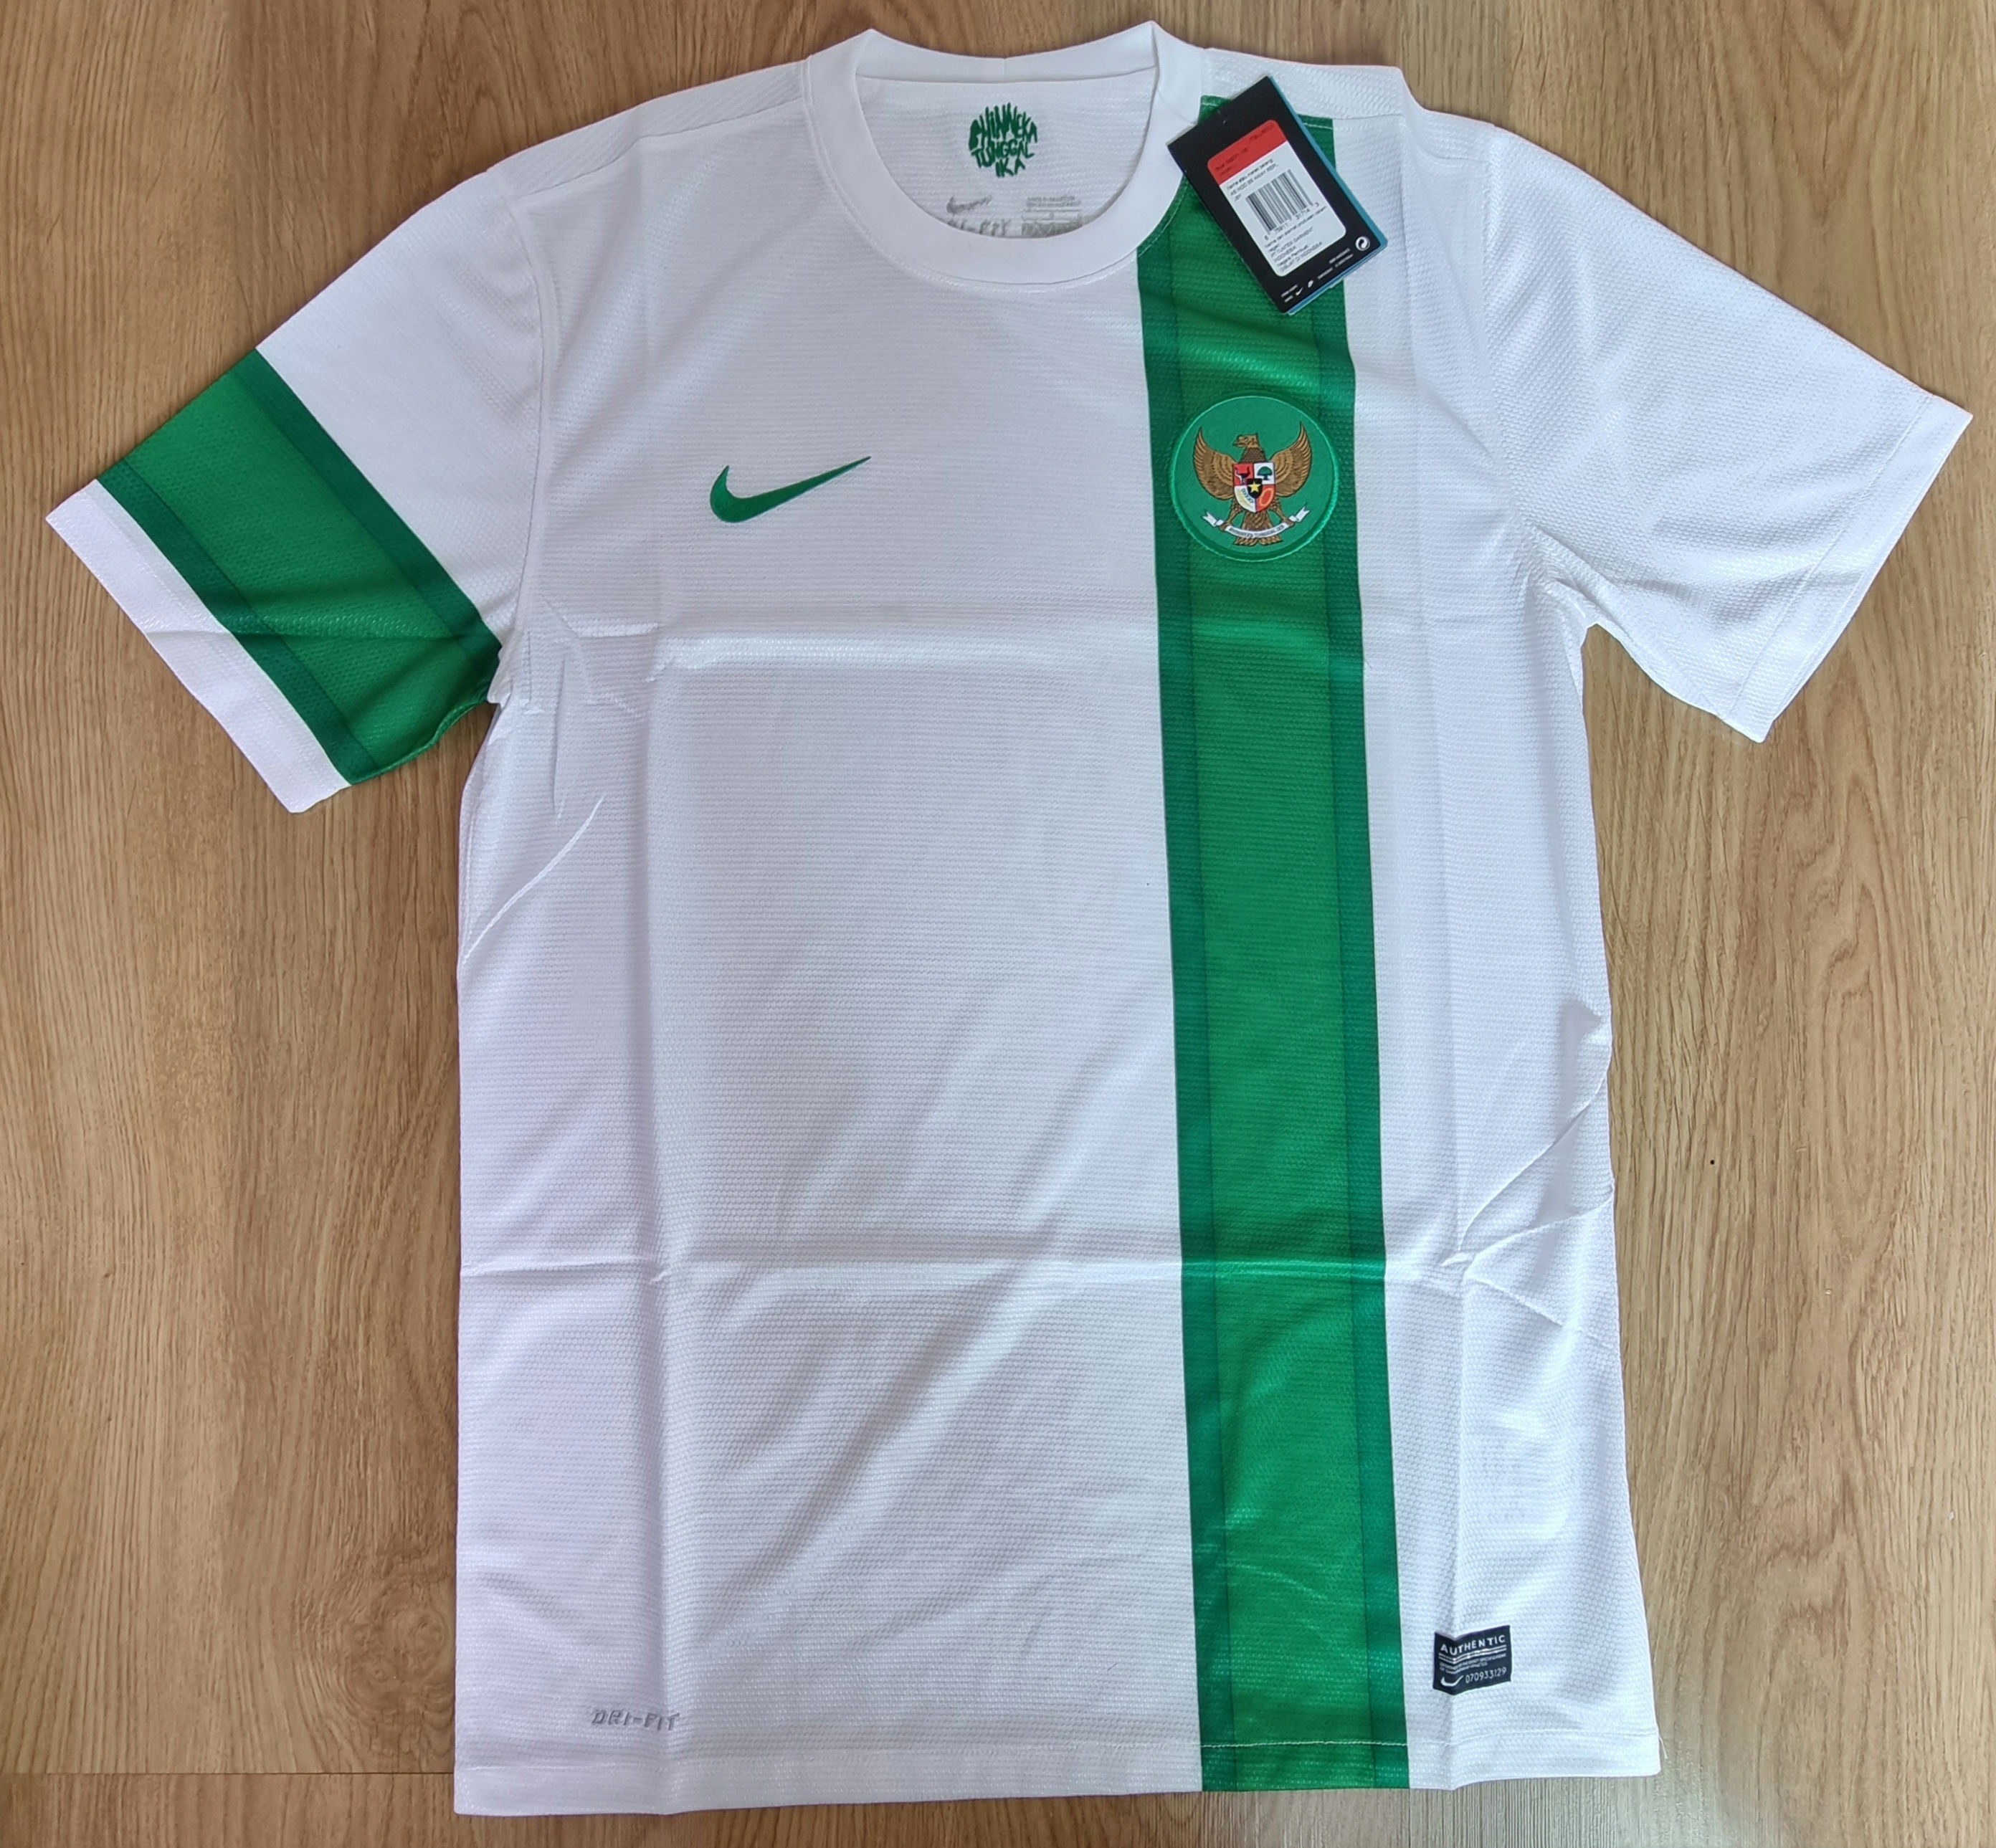 2012 Indonesia National Team Football Soccer Authentic Genuine Nike Jersey Shirt White